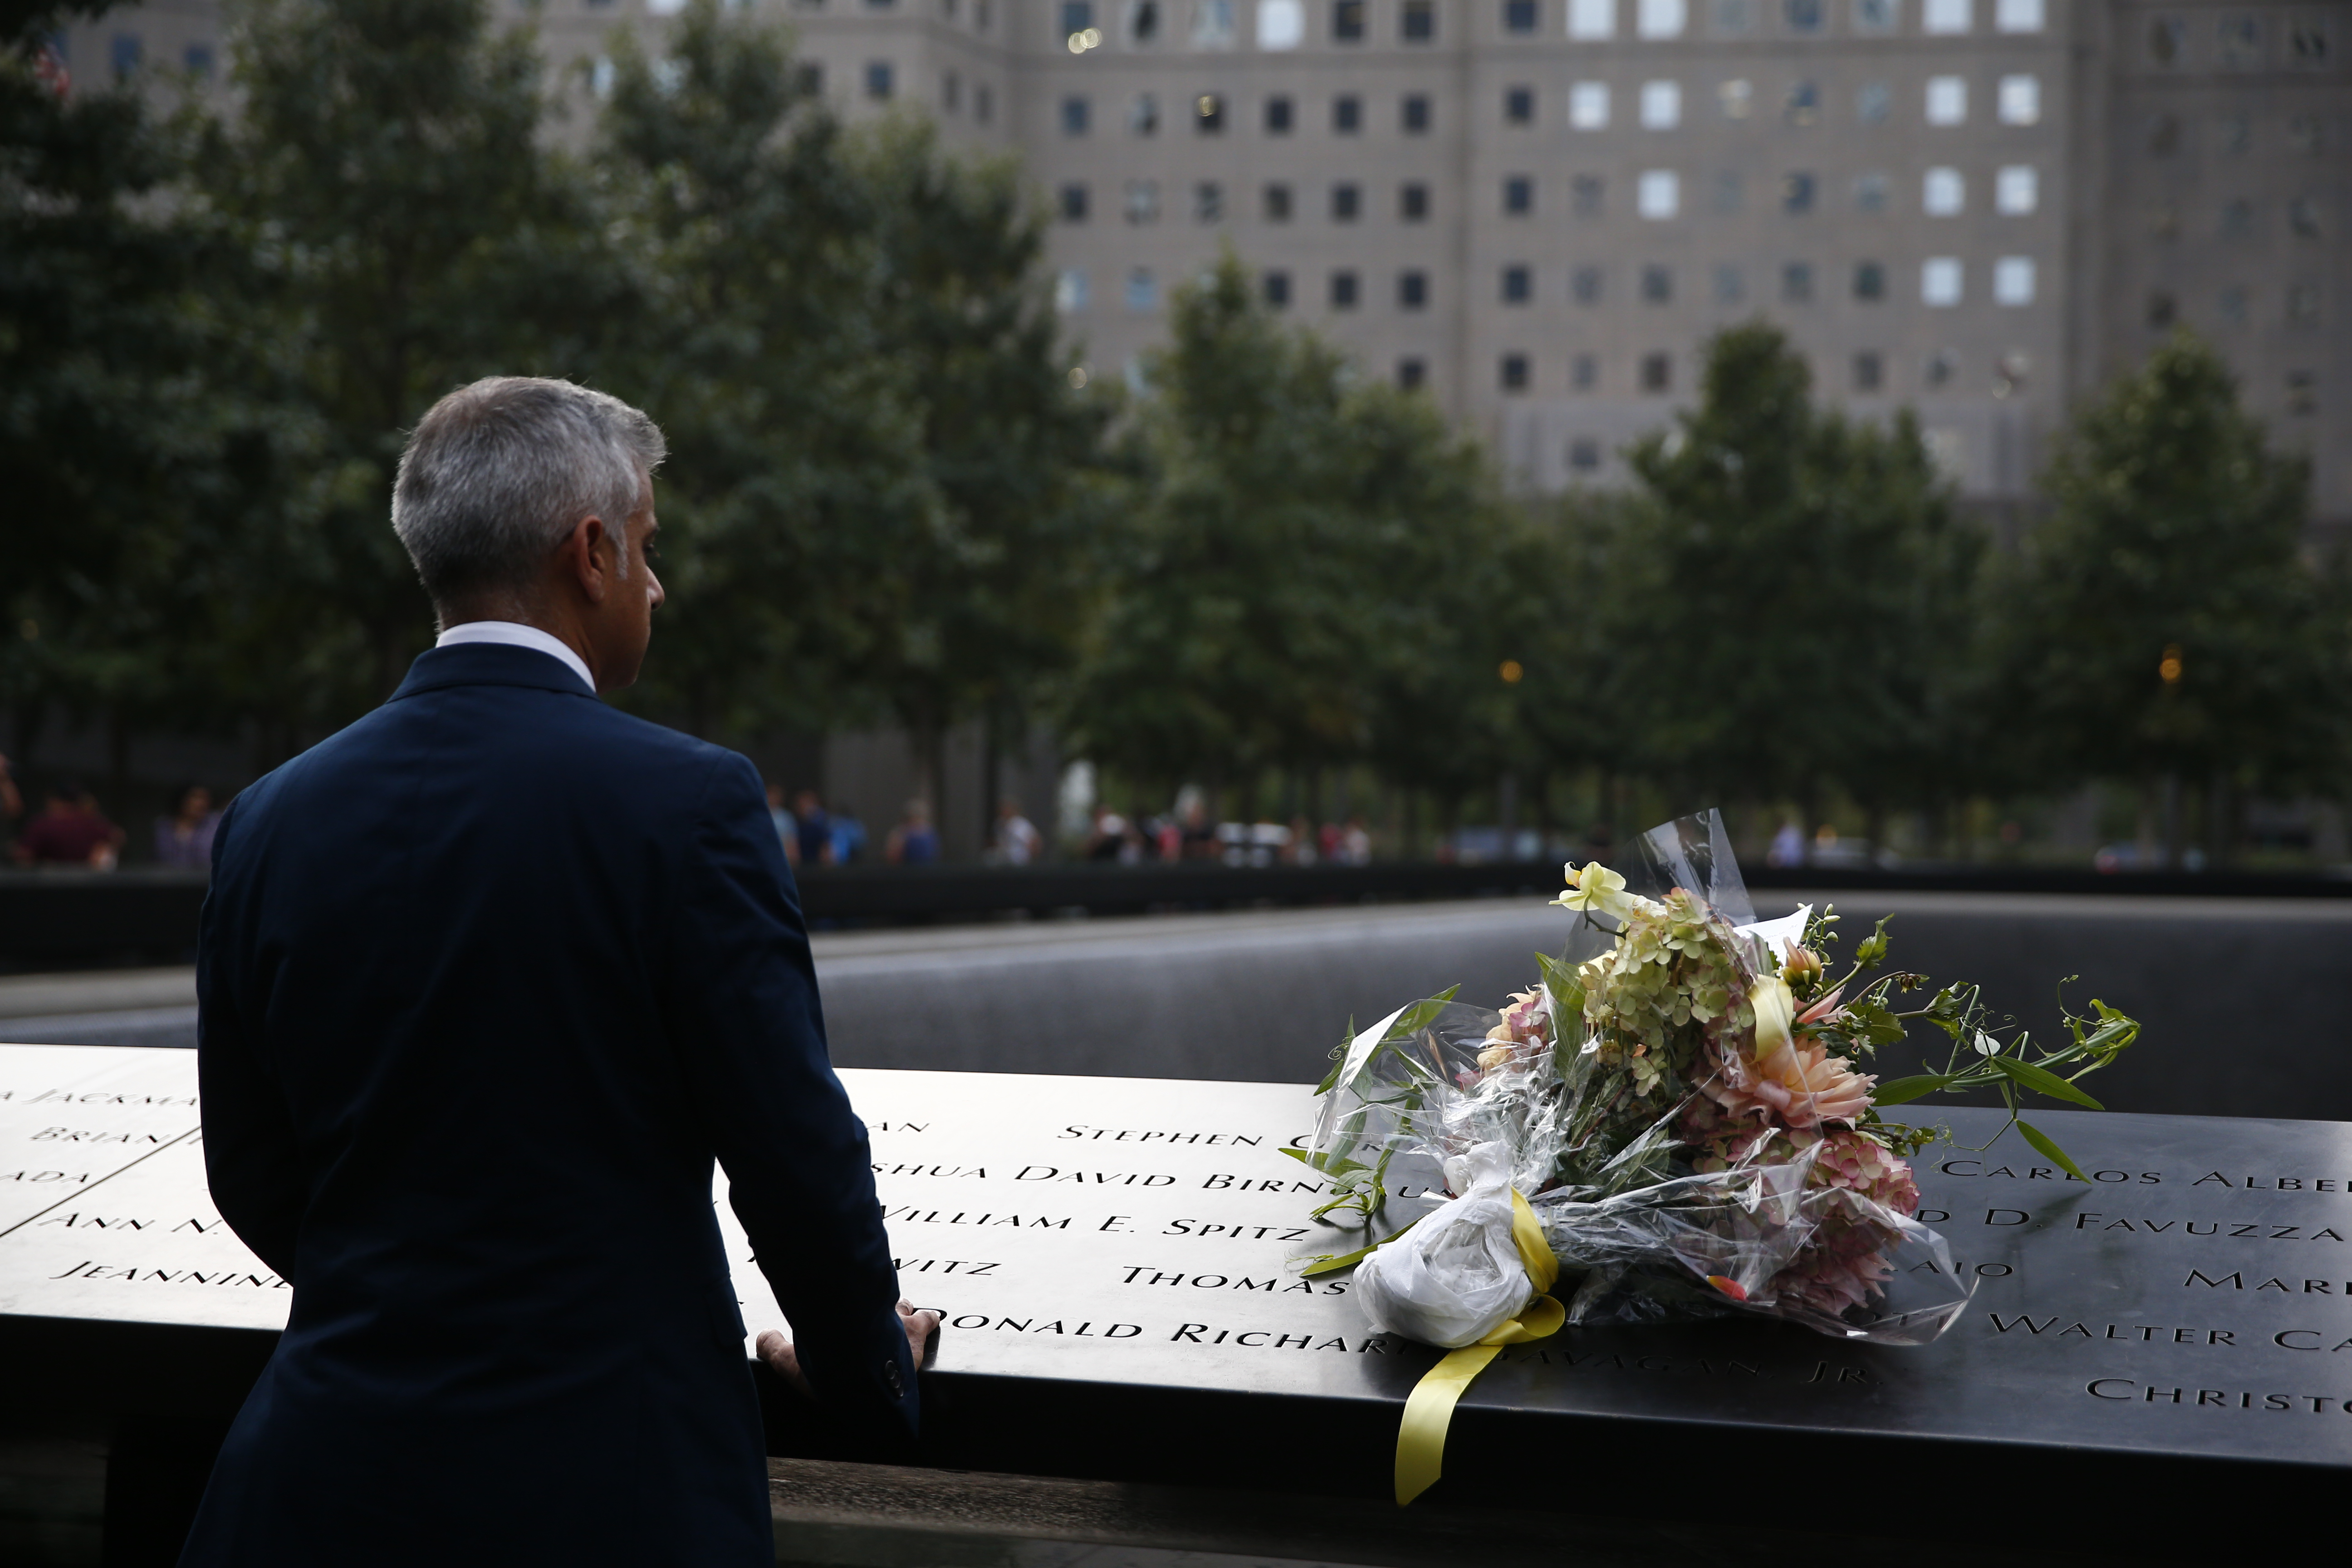 Shadiq Khan, the mayor of London, looks out at a reflecting pool at the 9/11 Memorial. A bouquet of flowers sits on the bronza parapet beside him.